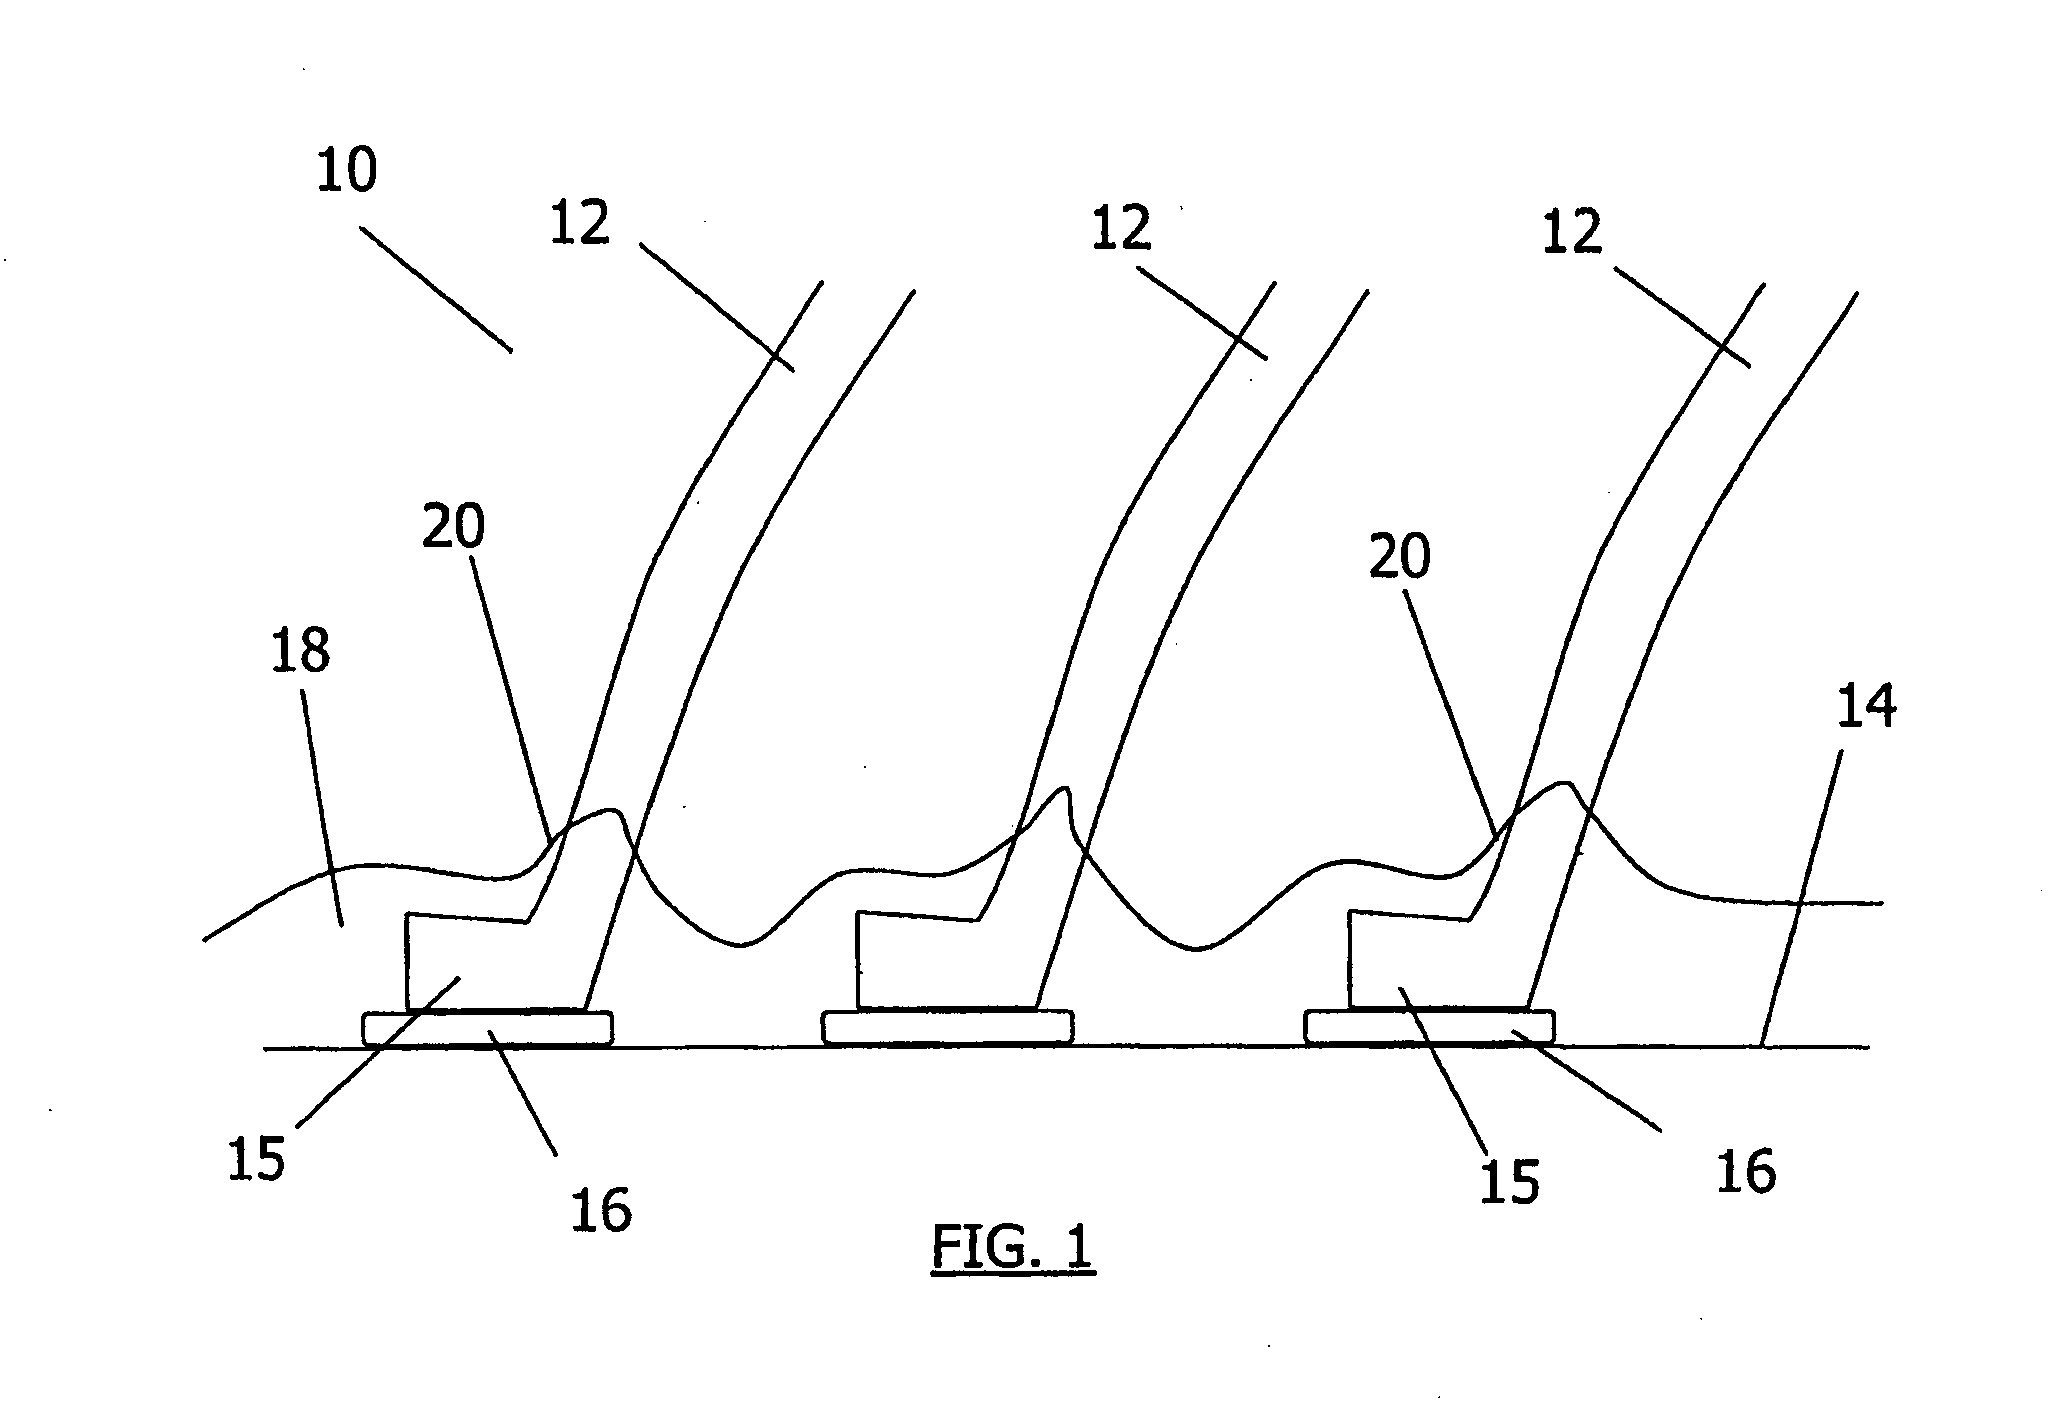 Reinforced probes for testing semiconductor devices